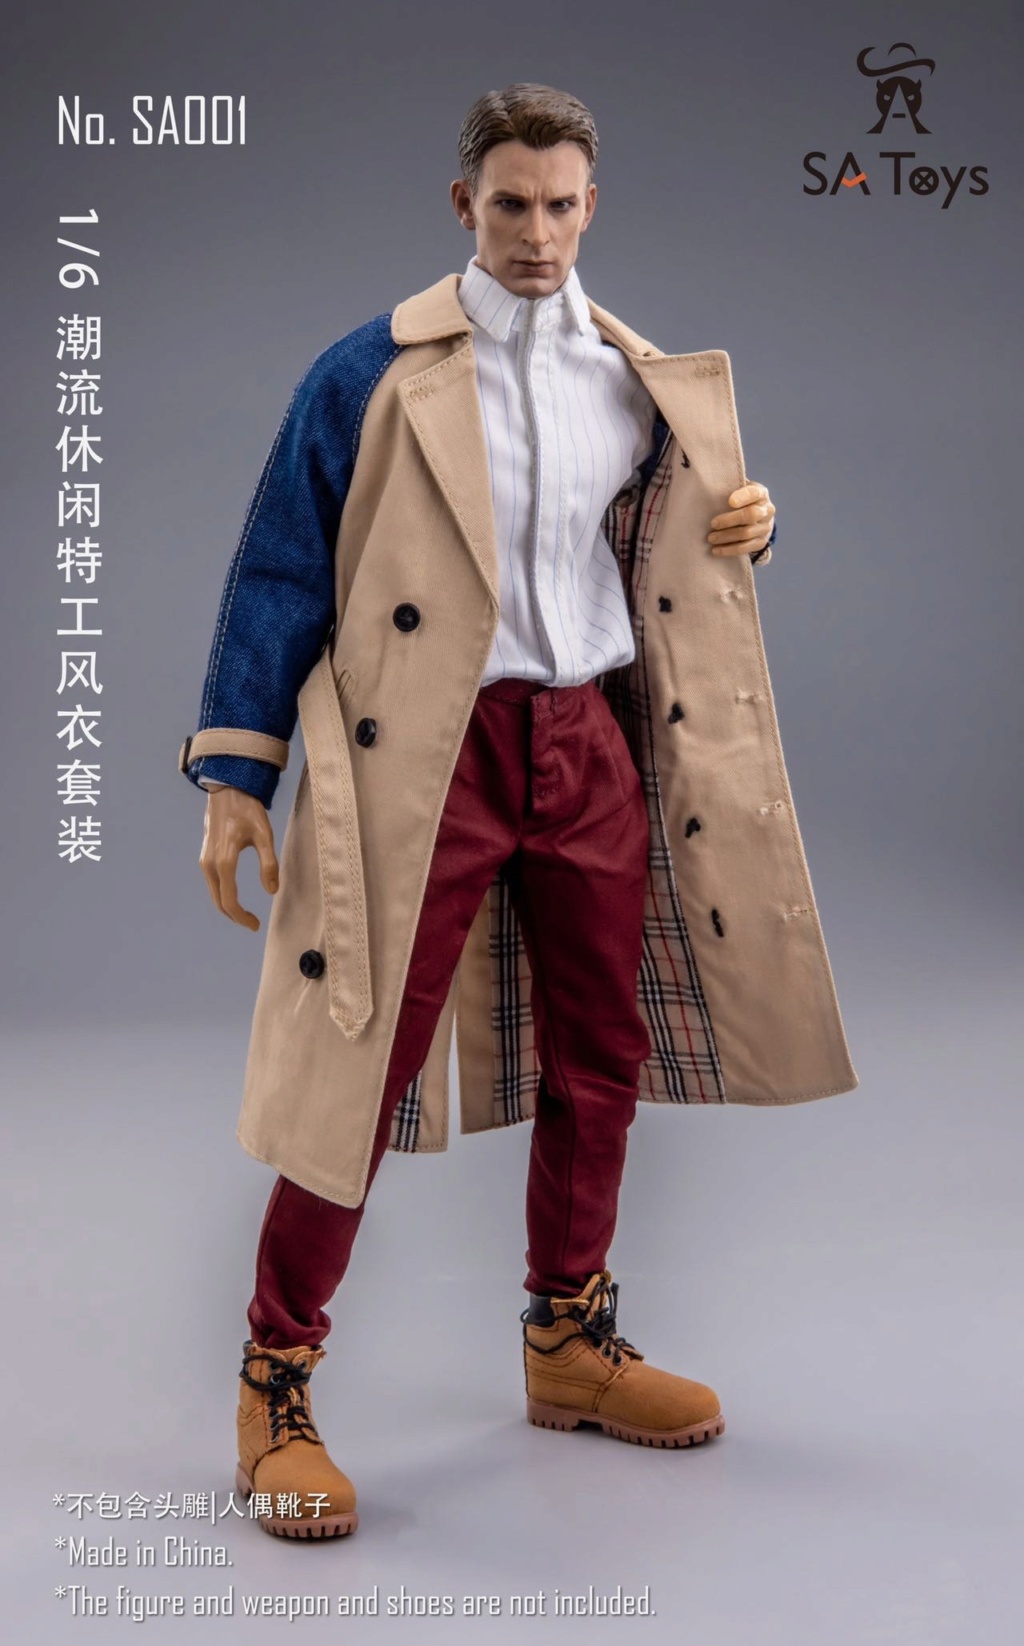 Clothing - NEW PRODUCT: SA Toys: 1/6 Trend Casual Agent Trench coat set (SA001) 15314111